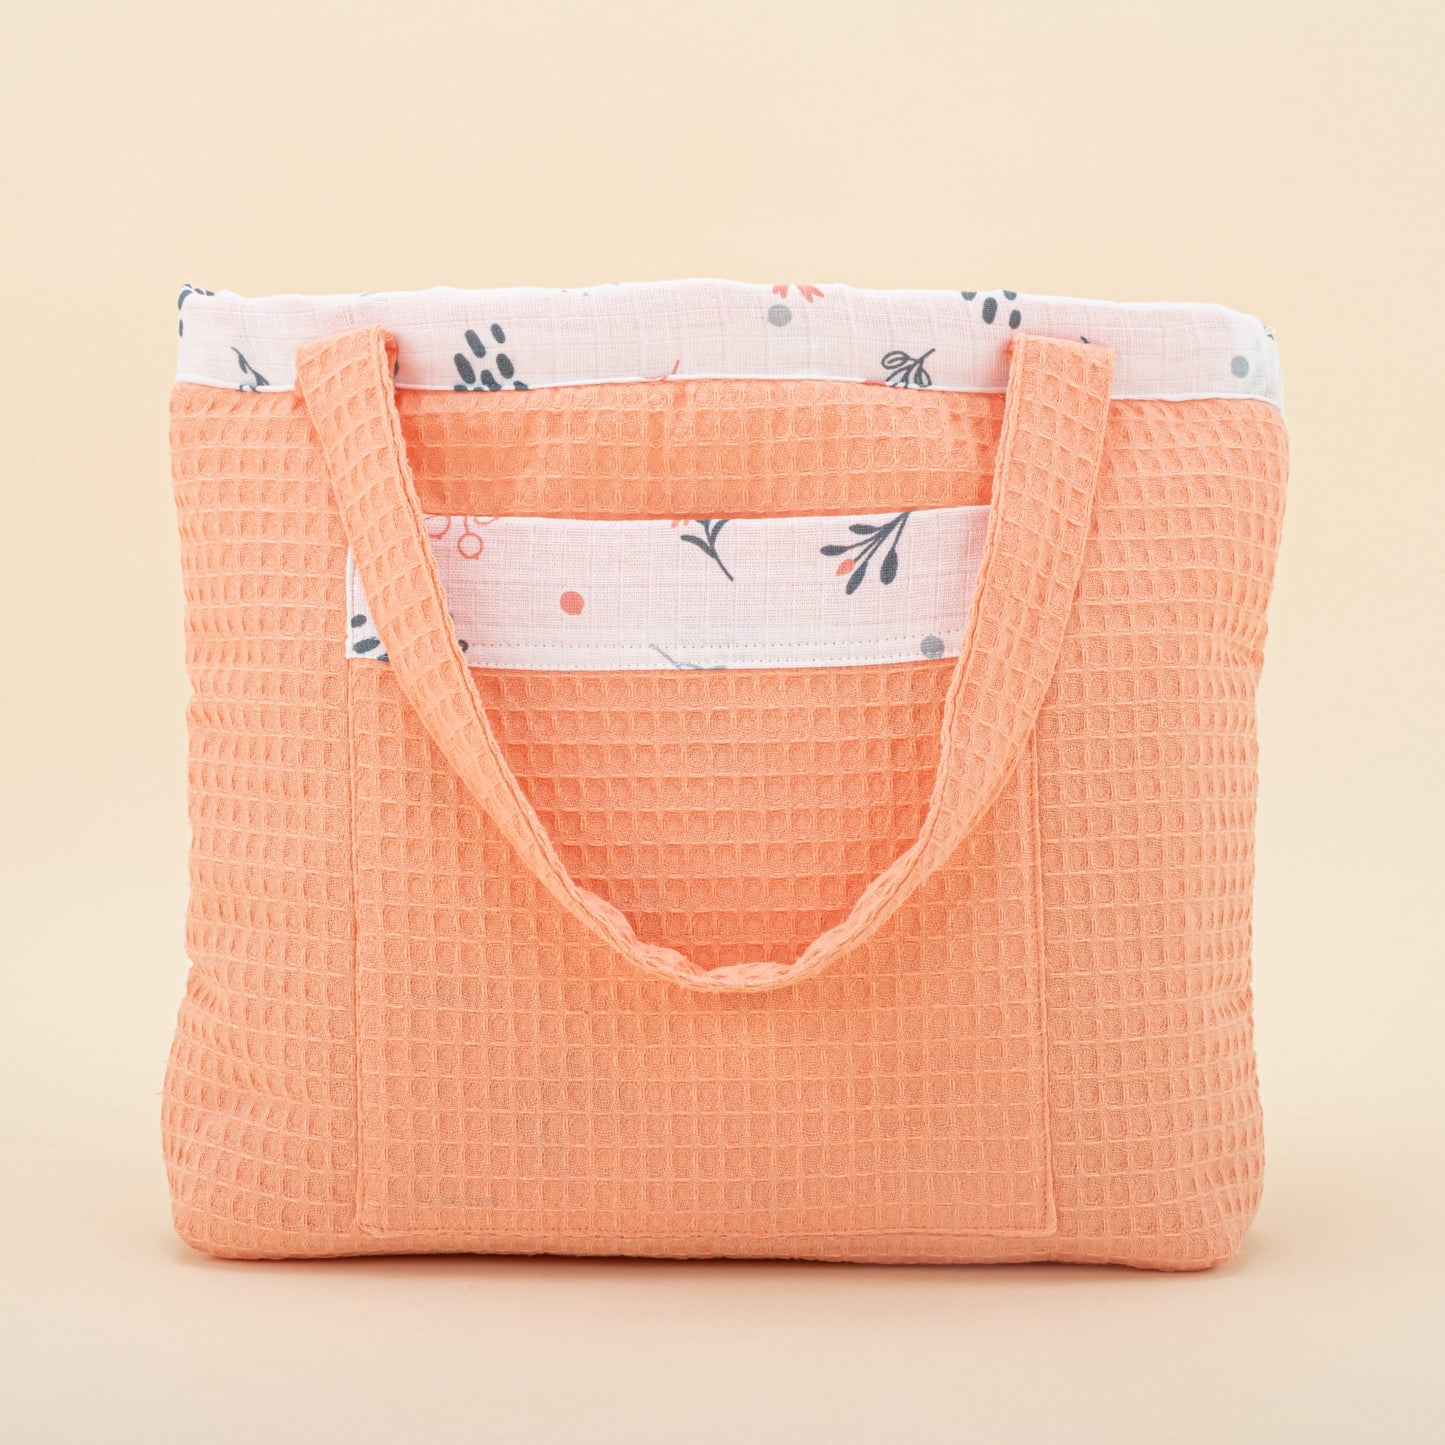 Baby Care Bag - Salmon Honeycomb - Green Flowers